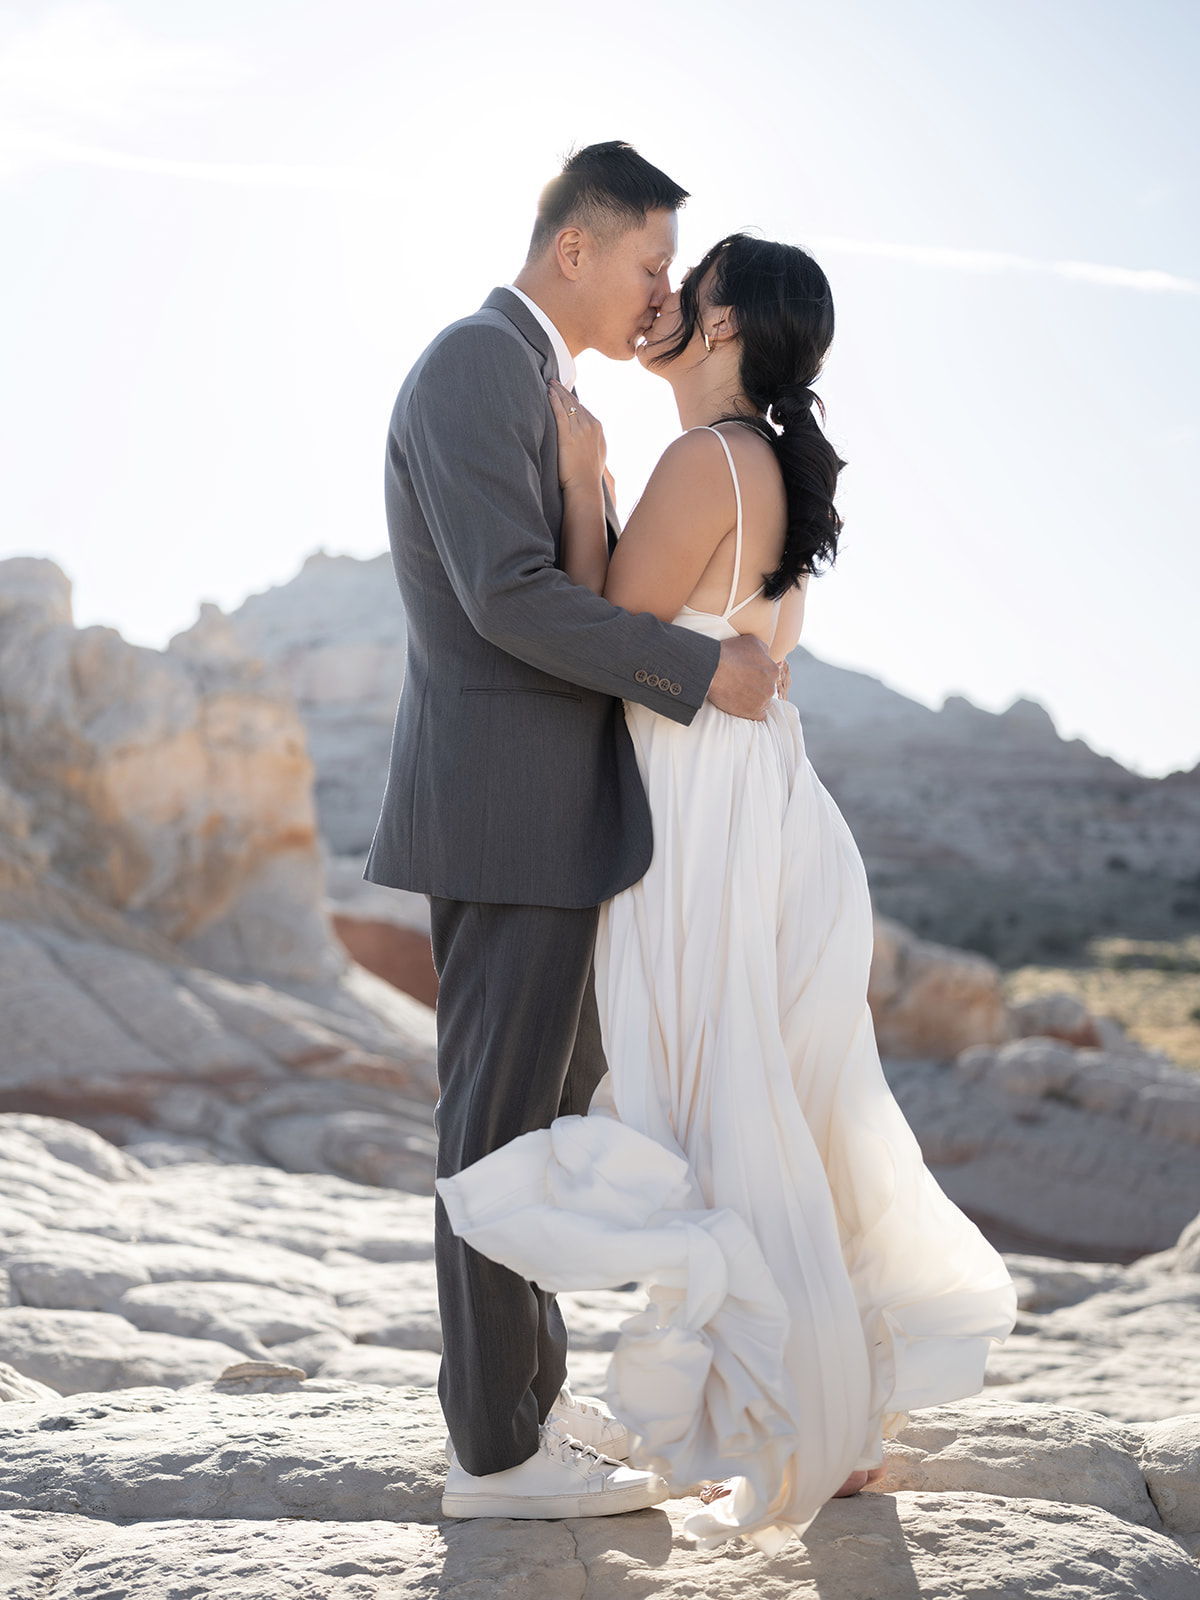 Couple celebrating their elopement surrounded by stunning rock formations in White Pocket, Arizona